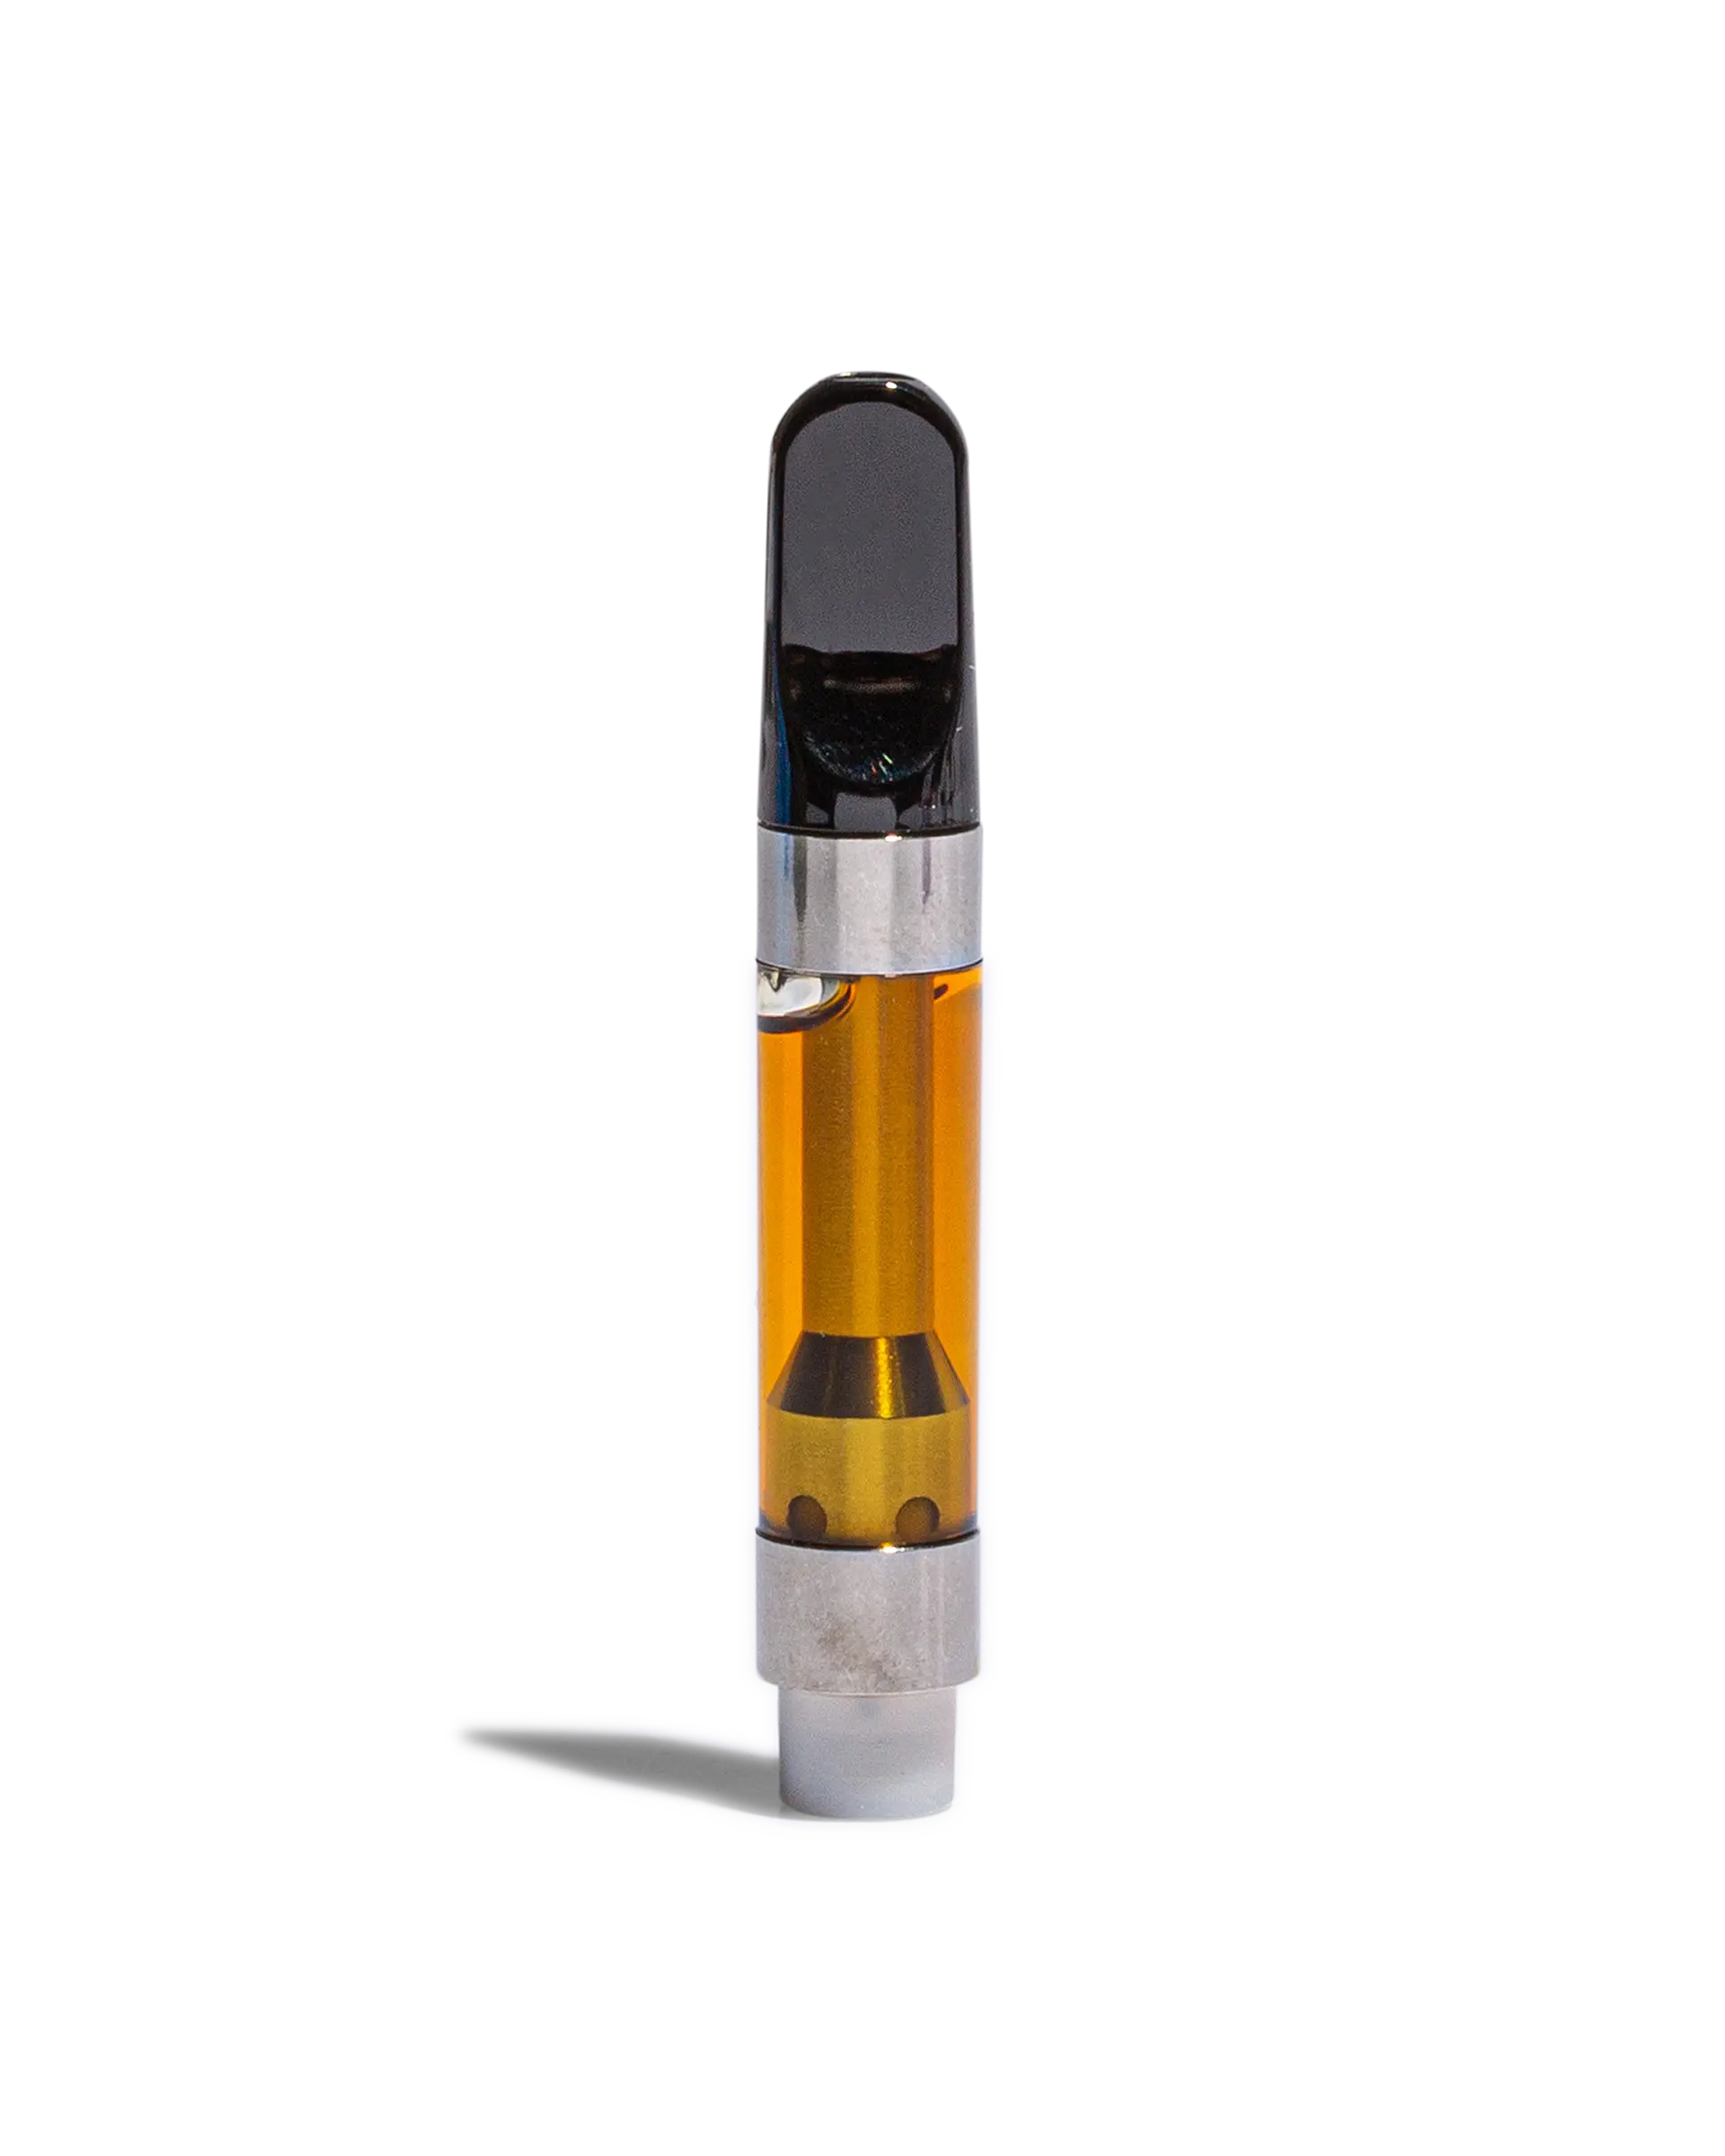 Plush Berry Live Resin Cart 1g, 1 of 2